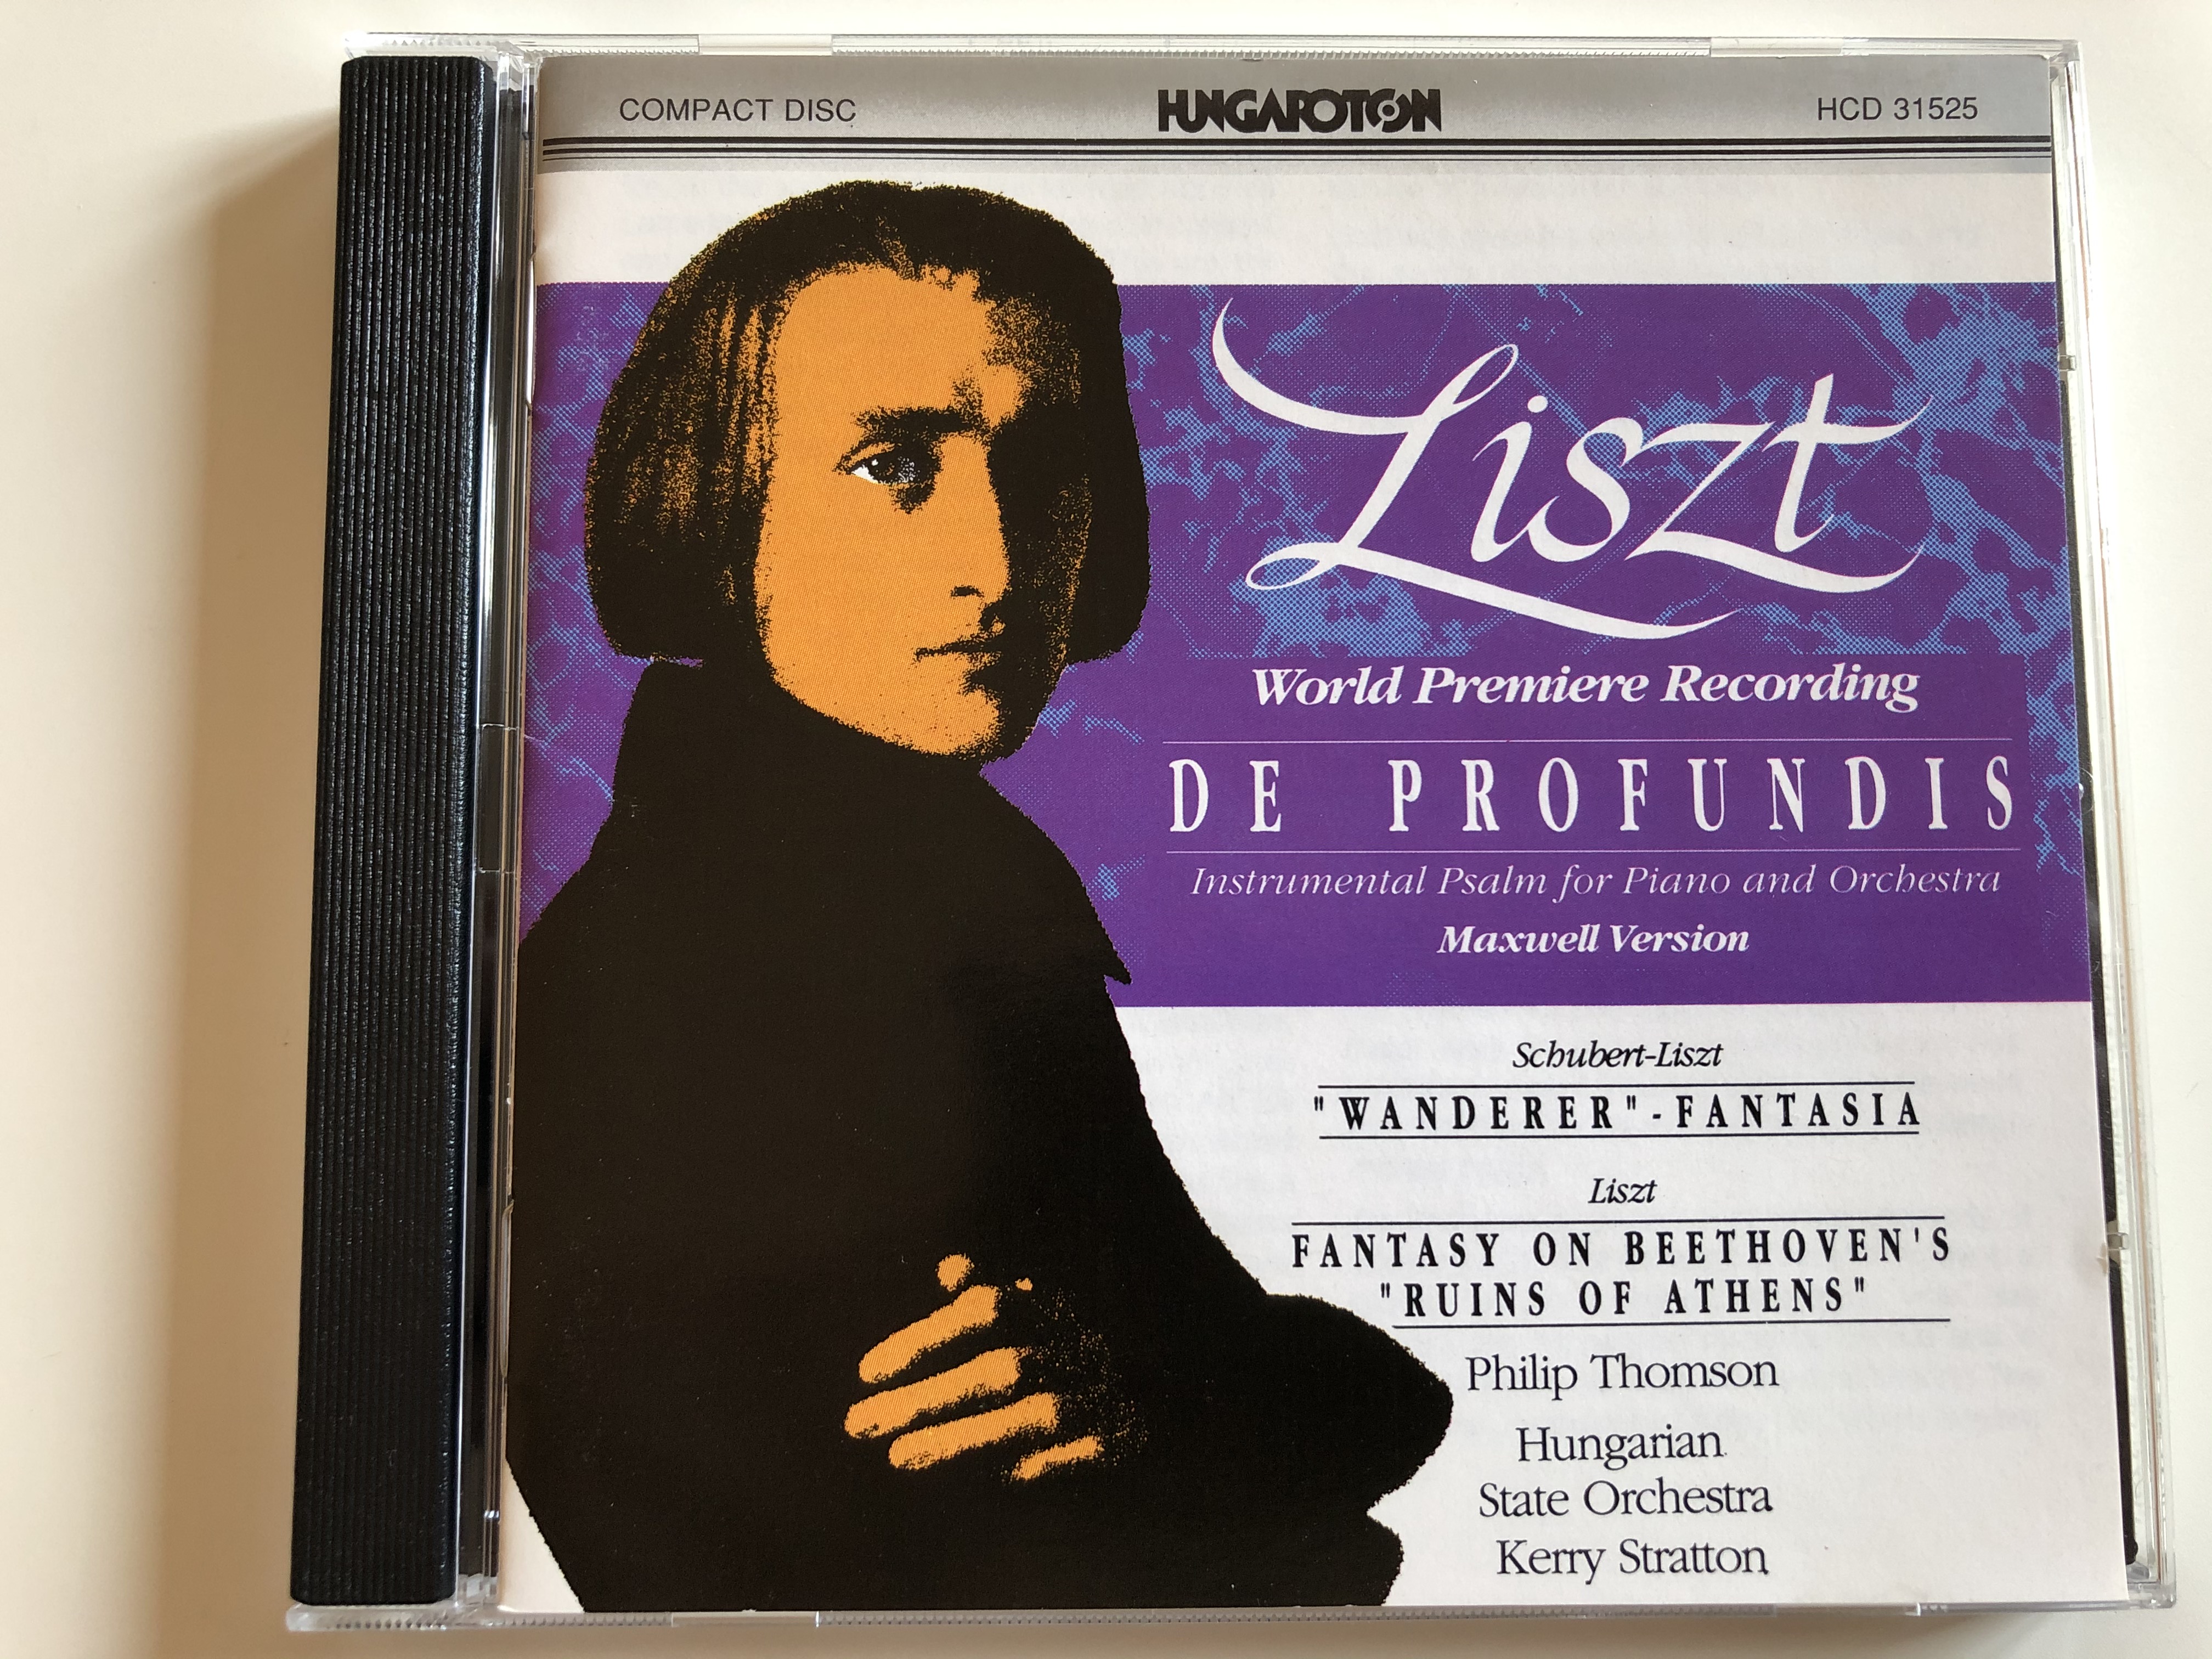 liszt-de-profundis-instrumental-psalm-for-piano-and-orchestra-schubert-liszt-wanderer-fanstasia-liszt-fantasy-on-beethoven-s-ruins-of-athens-philip-thomson-hungarian-state-orchestr-1-.jpg